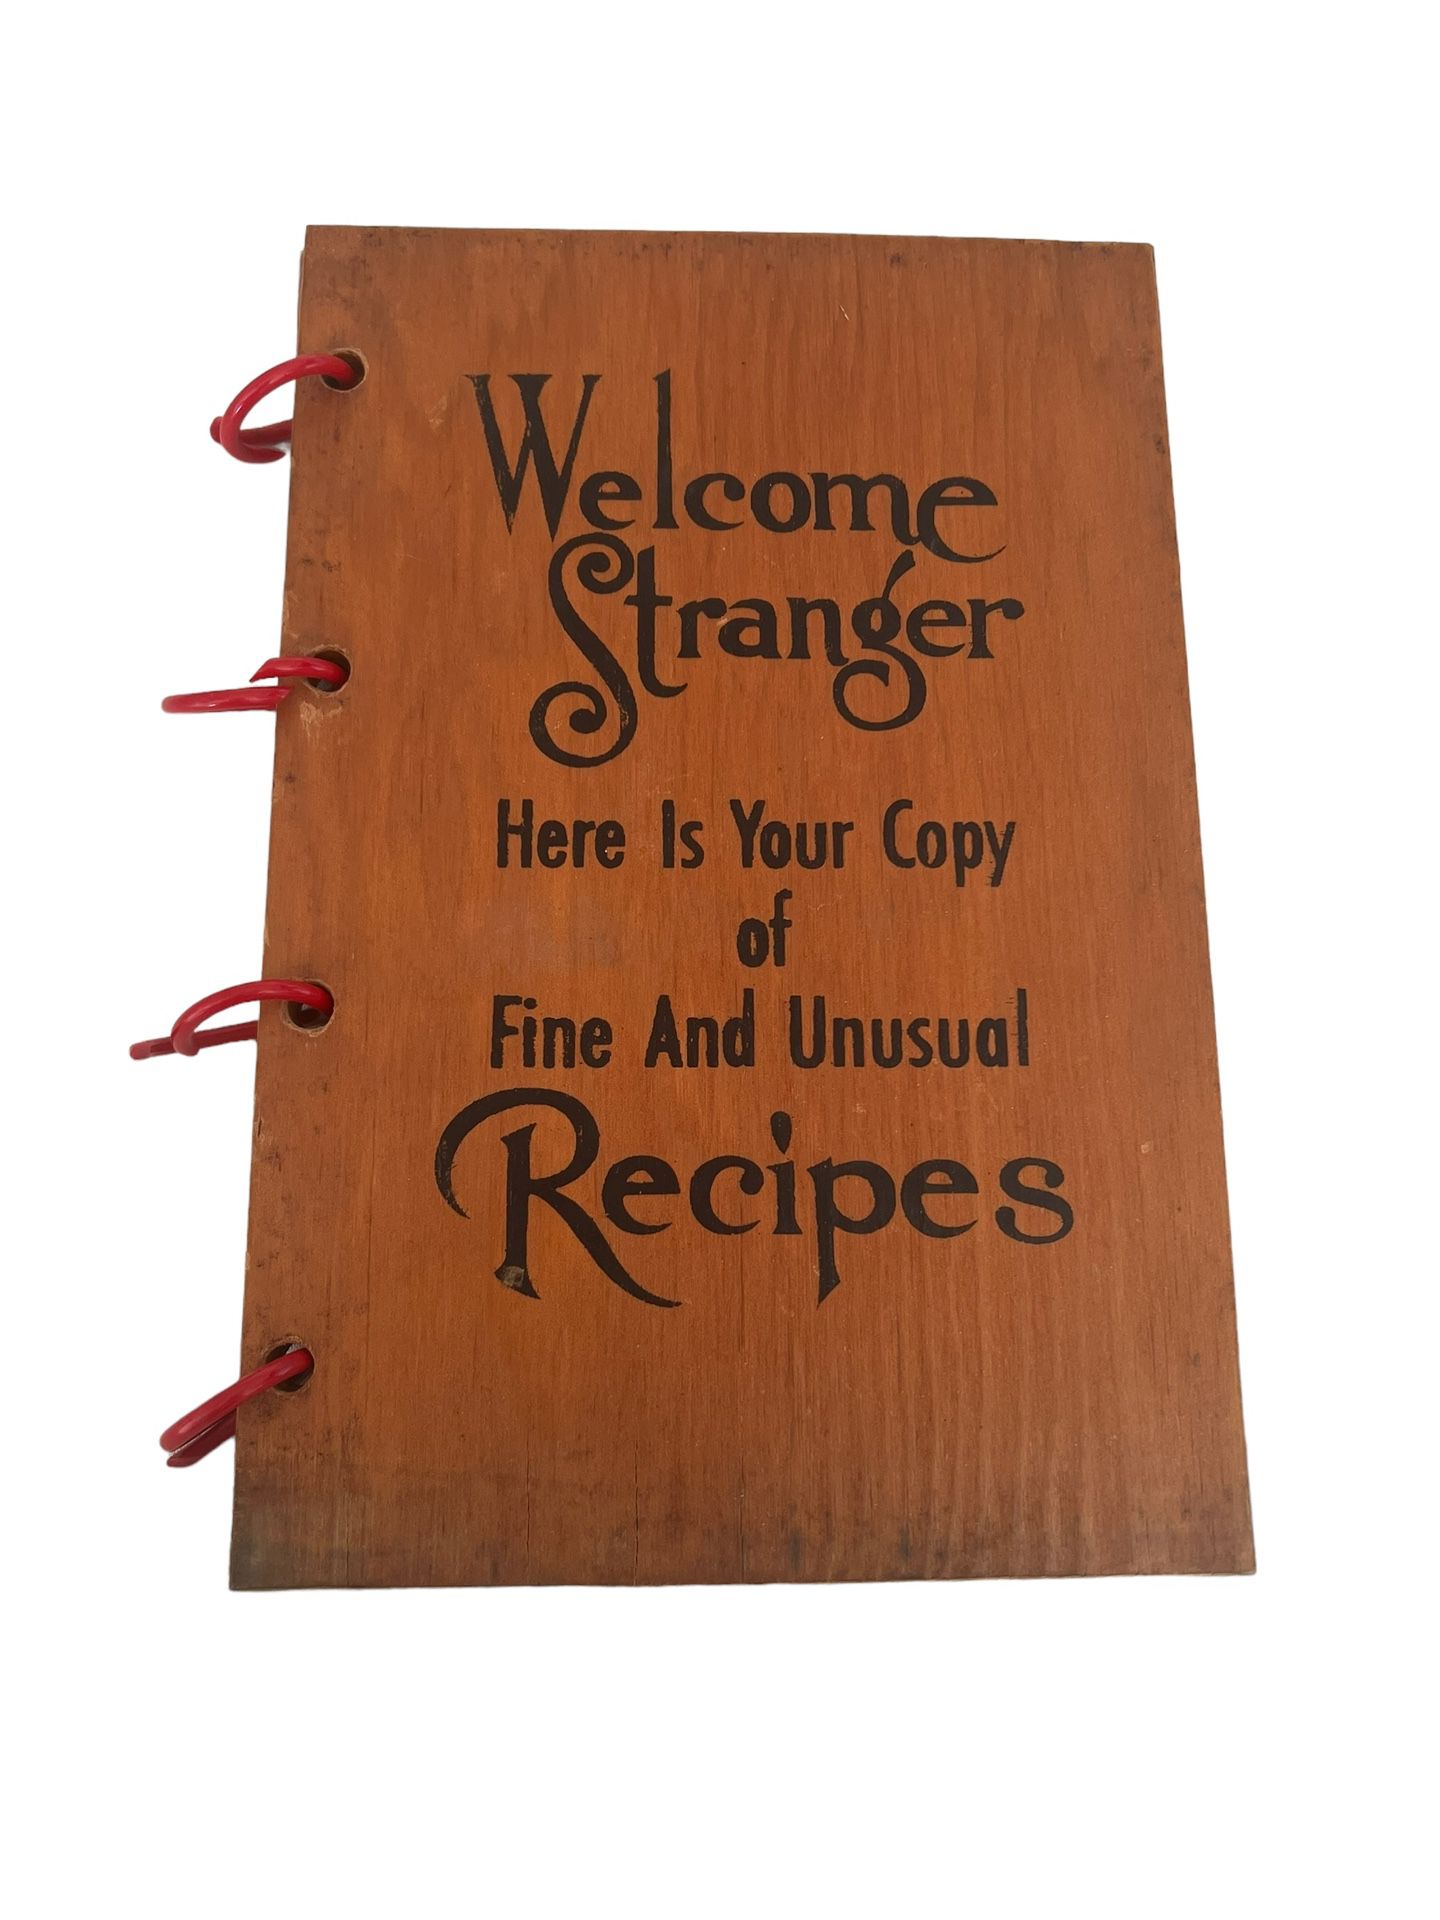 Vintage 1948 Welcome Stranger Wooden Florida Recipe Book  This book used to have recipes which are not available anymore.This vintage 1948 Welcome Str